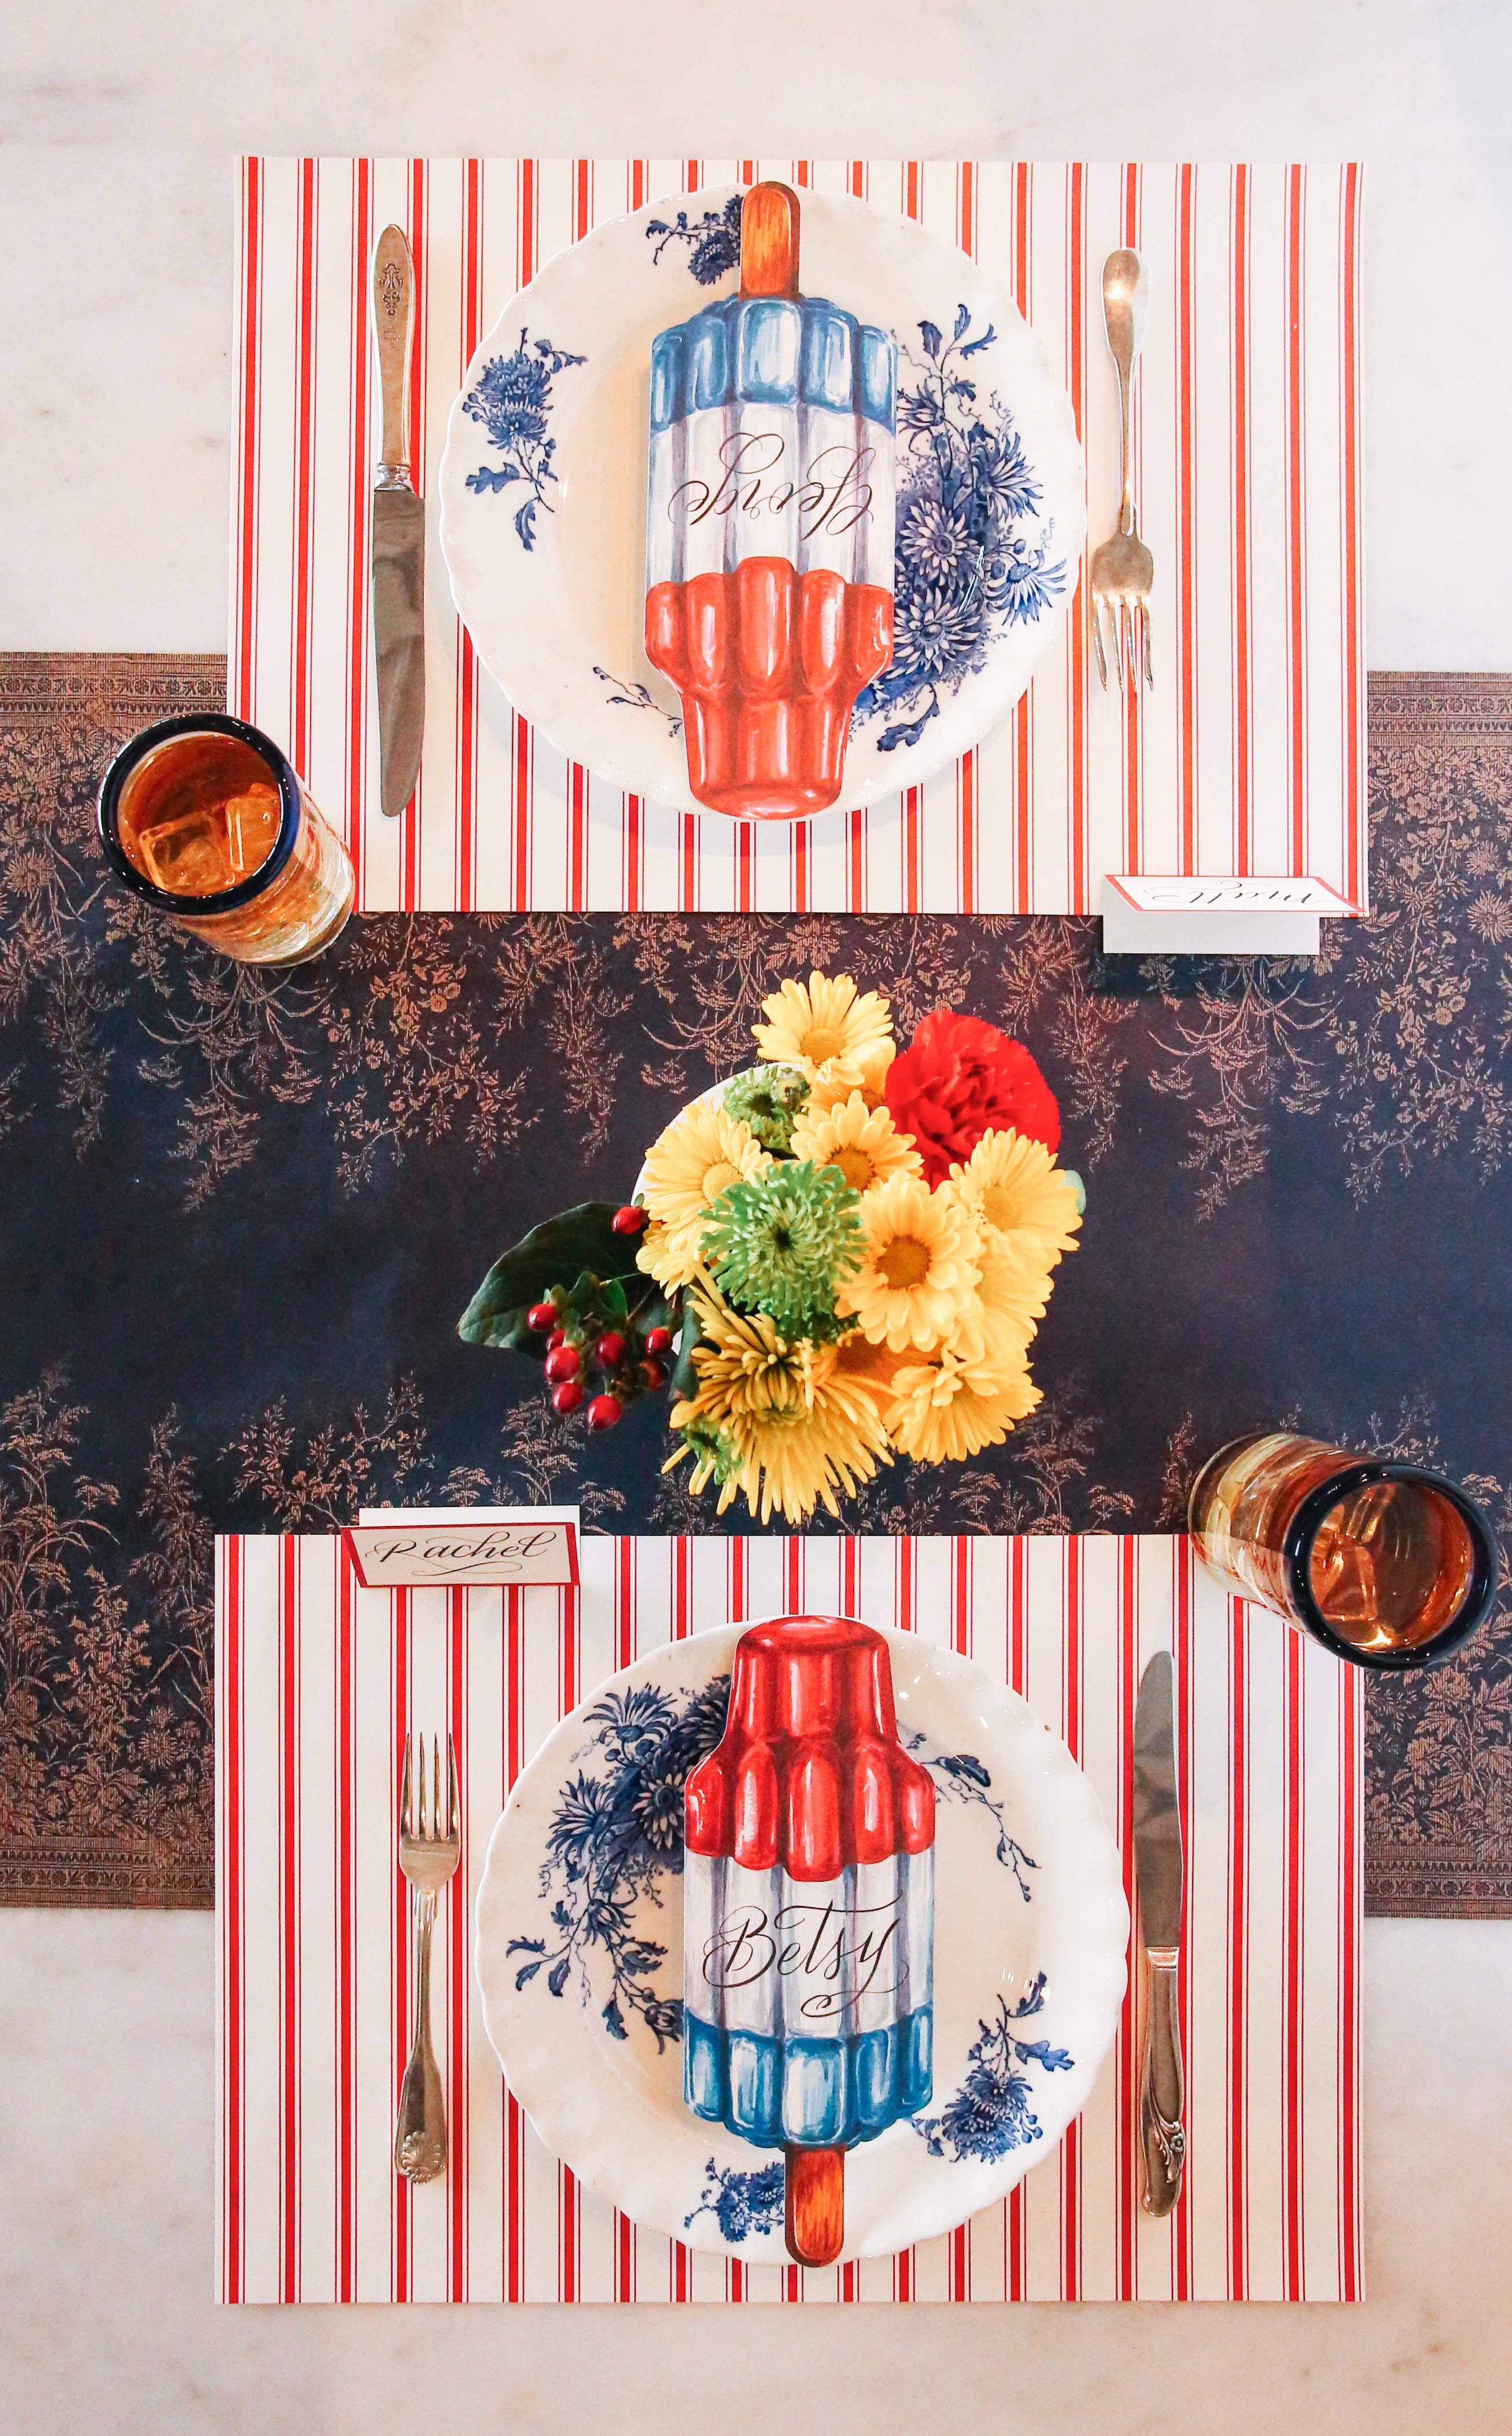 The Red Ribbon Stripe Placemat under a patriotic table setting for two, from above.